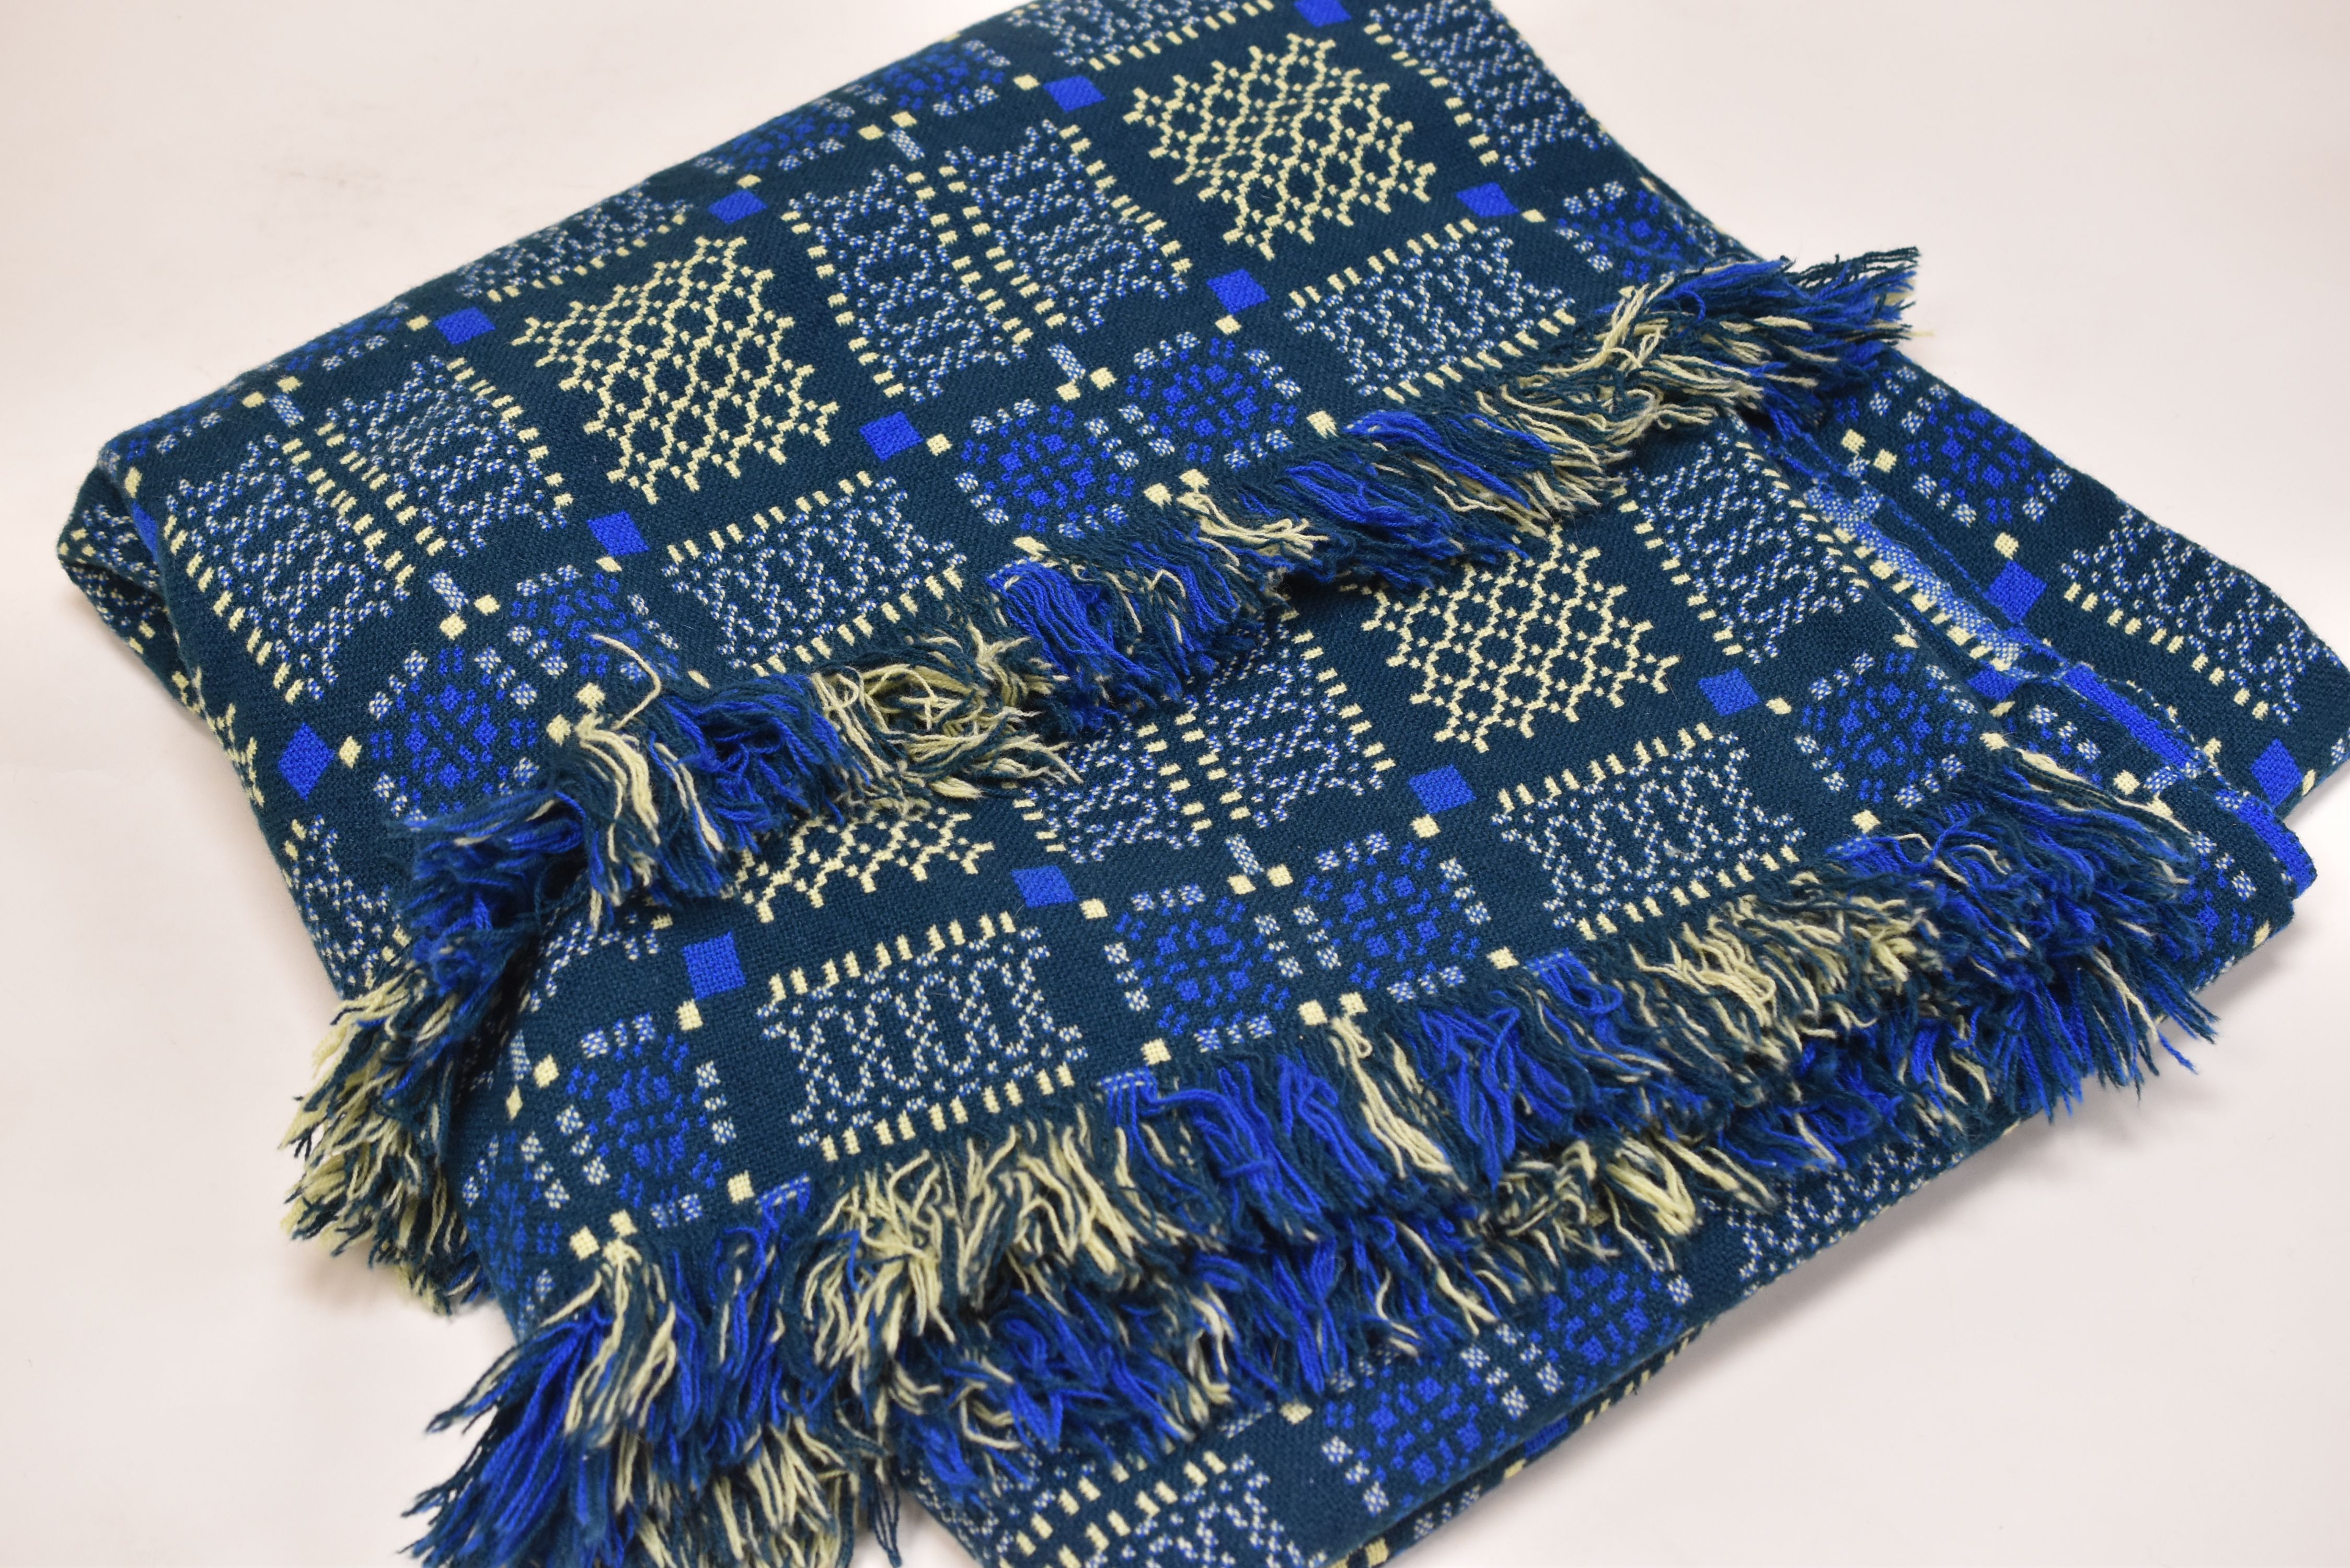 A WELSH WOOL BLANKET with blue and green reserve and yellow geometric patterning, 218 x 230cms